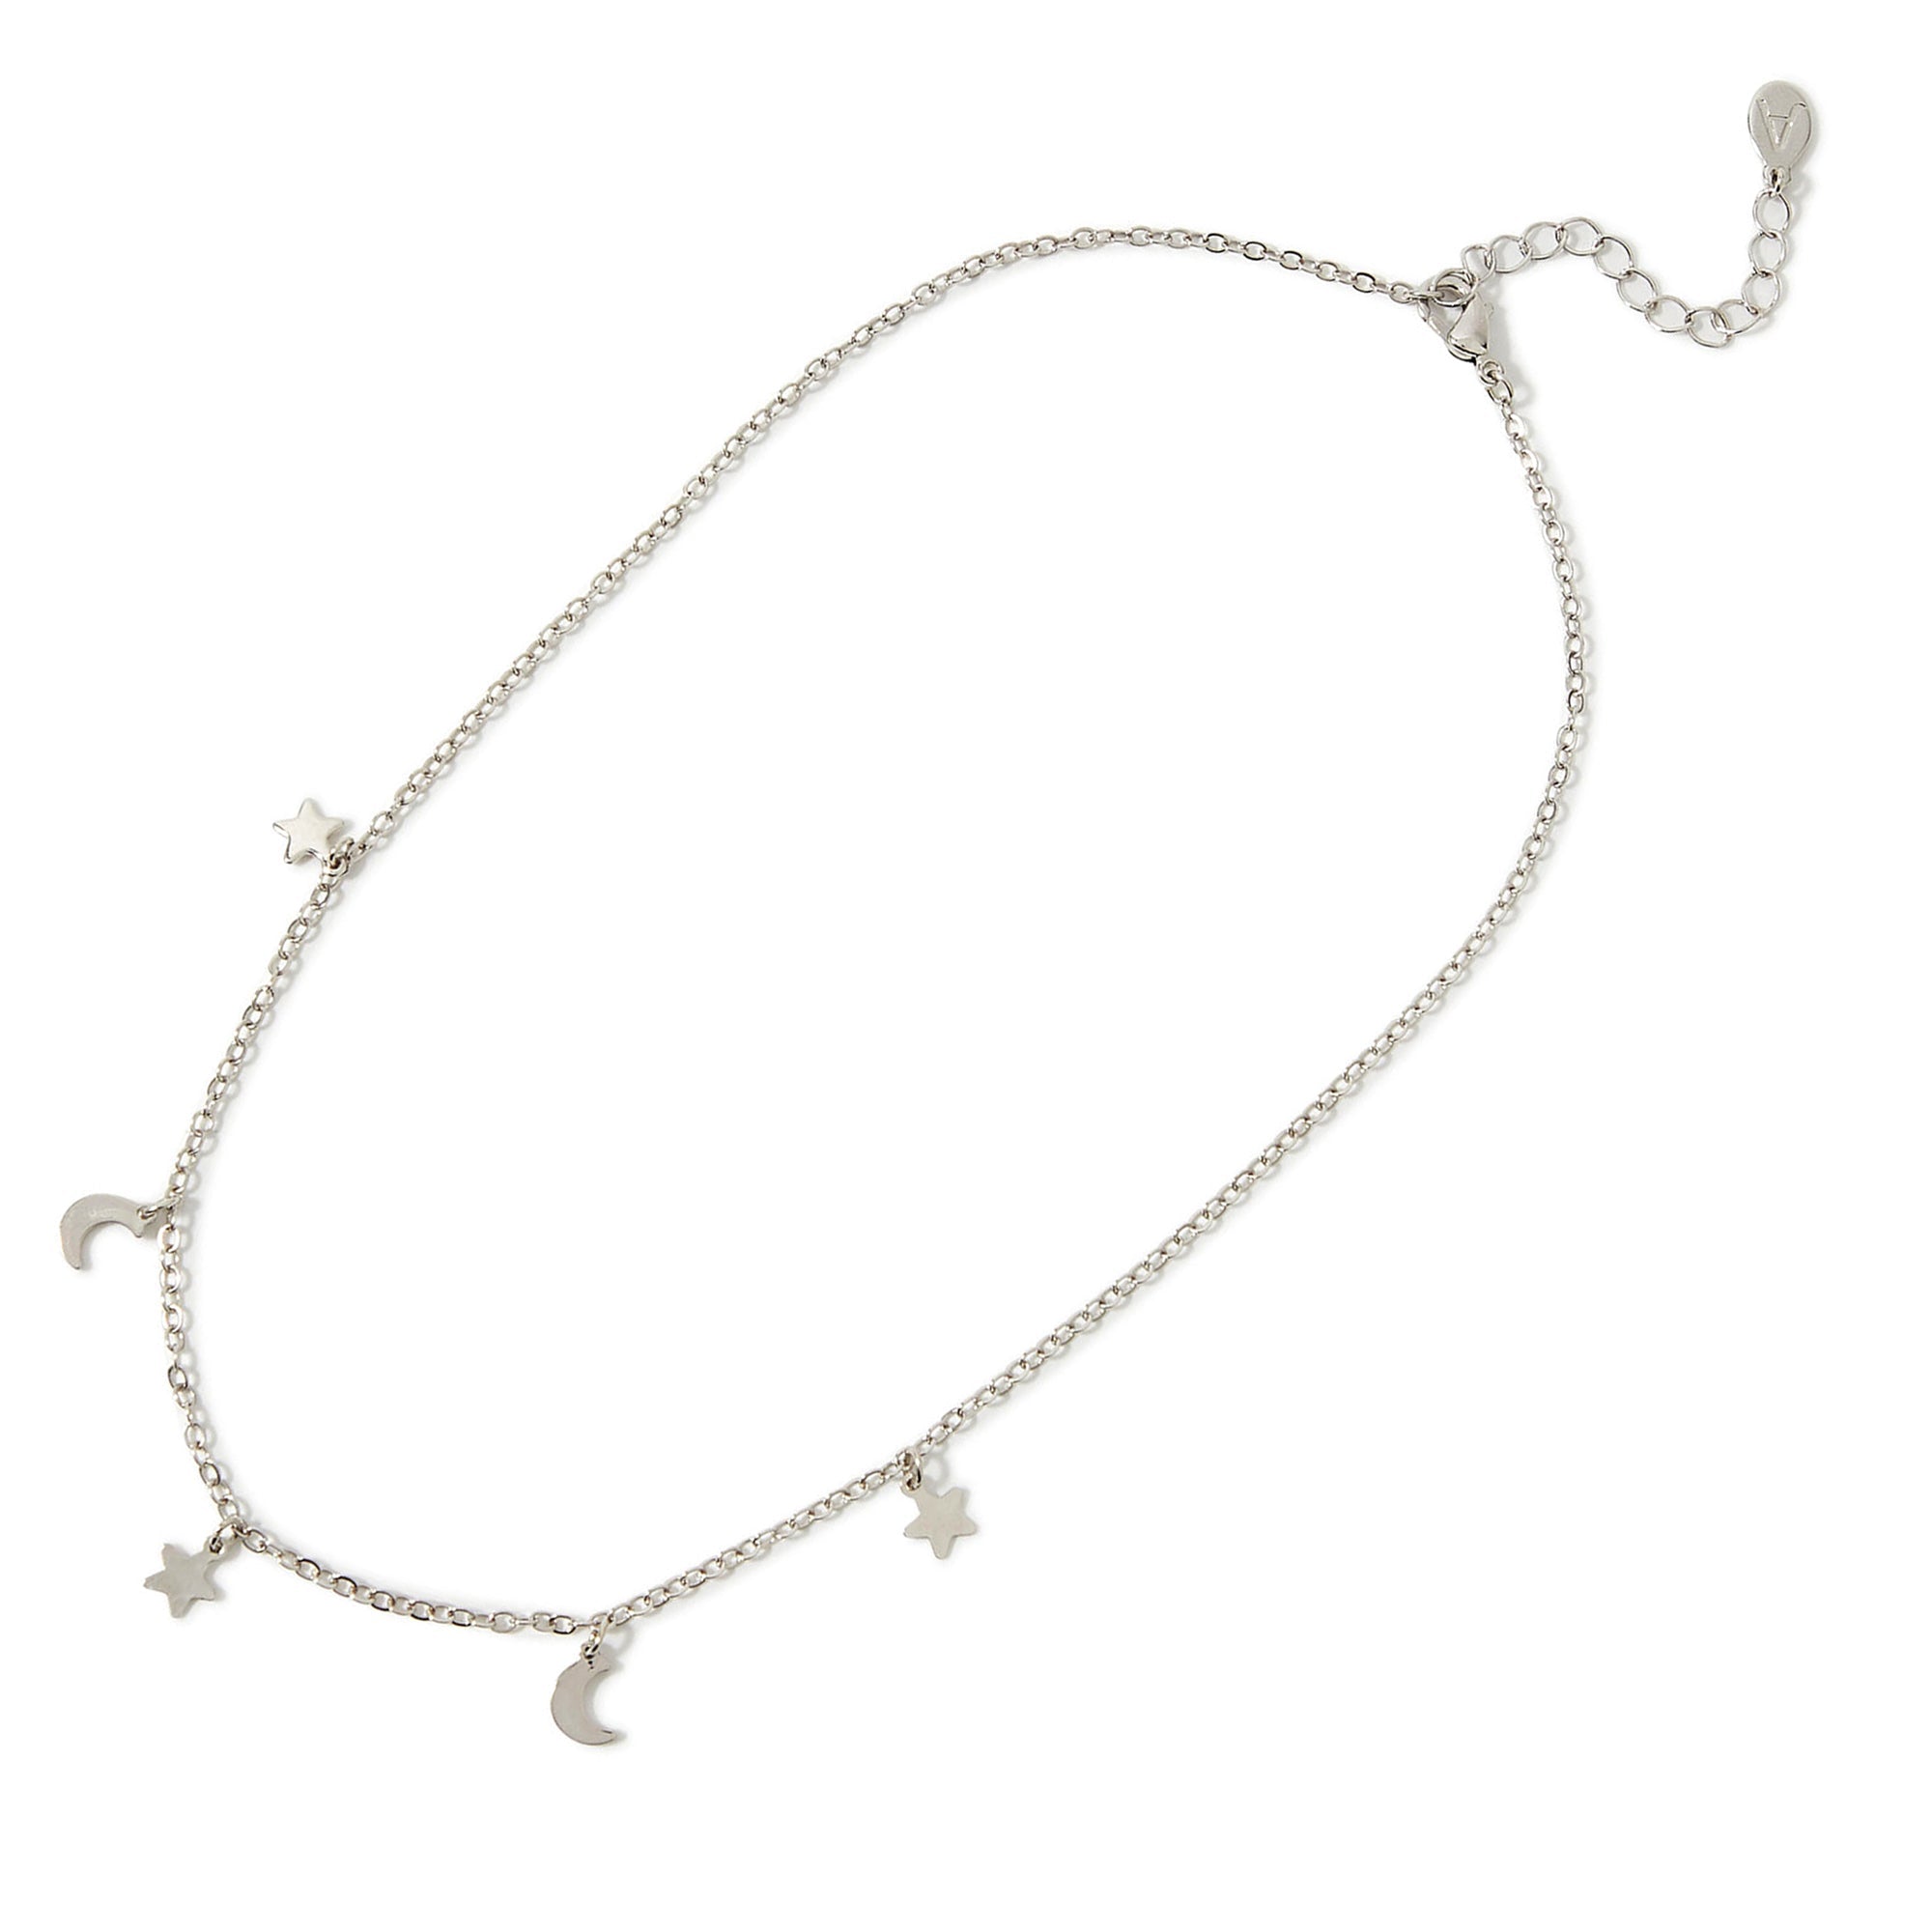 Dainty White Pearl Station Necklace - 14K White Gold and Pearls - Zoran  Designs